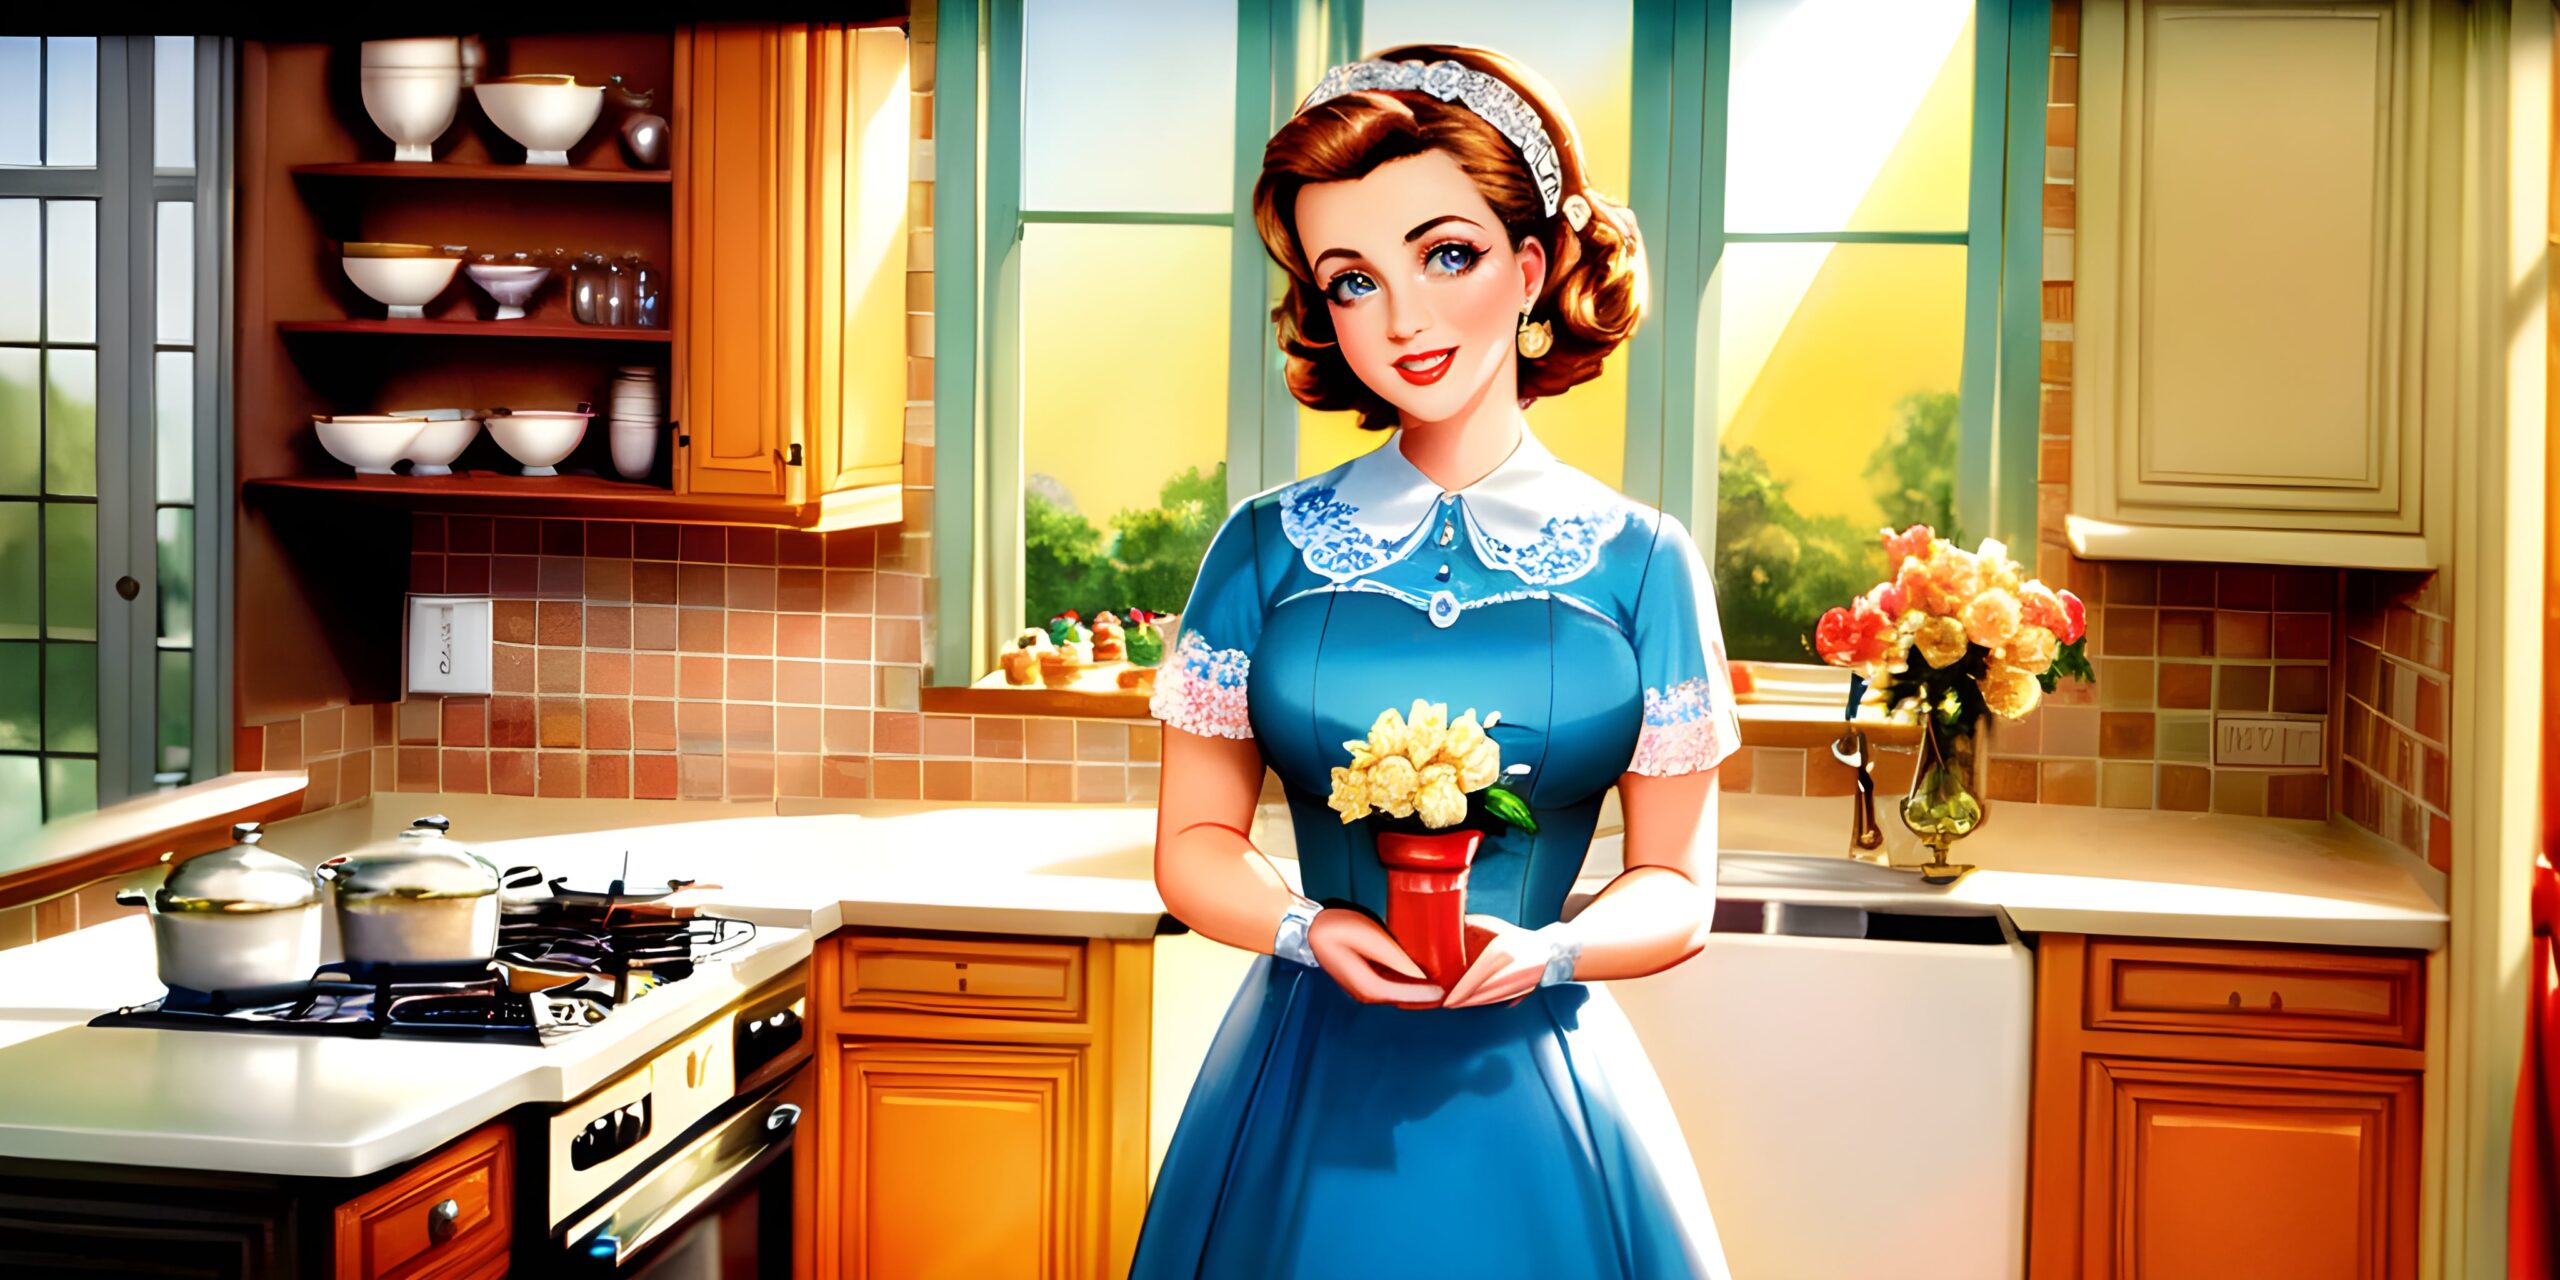 1950s Traditional Housewife in the kitchen